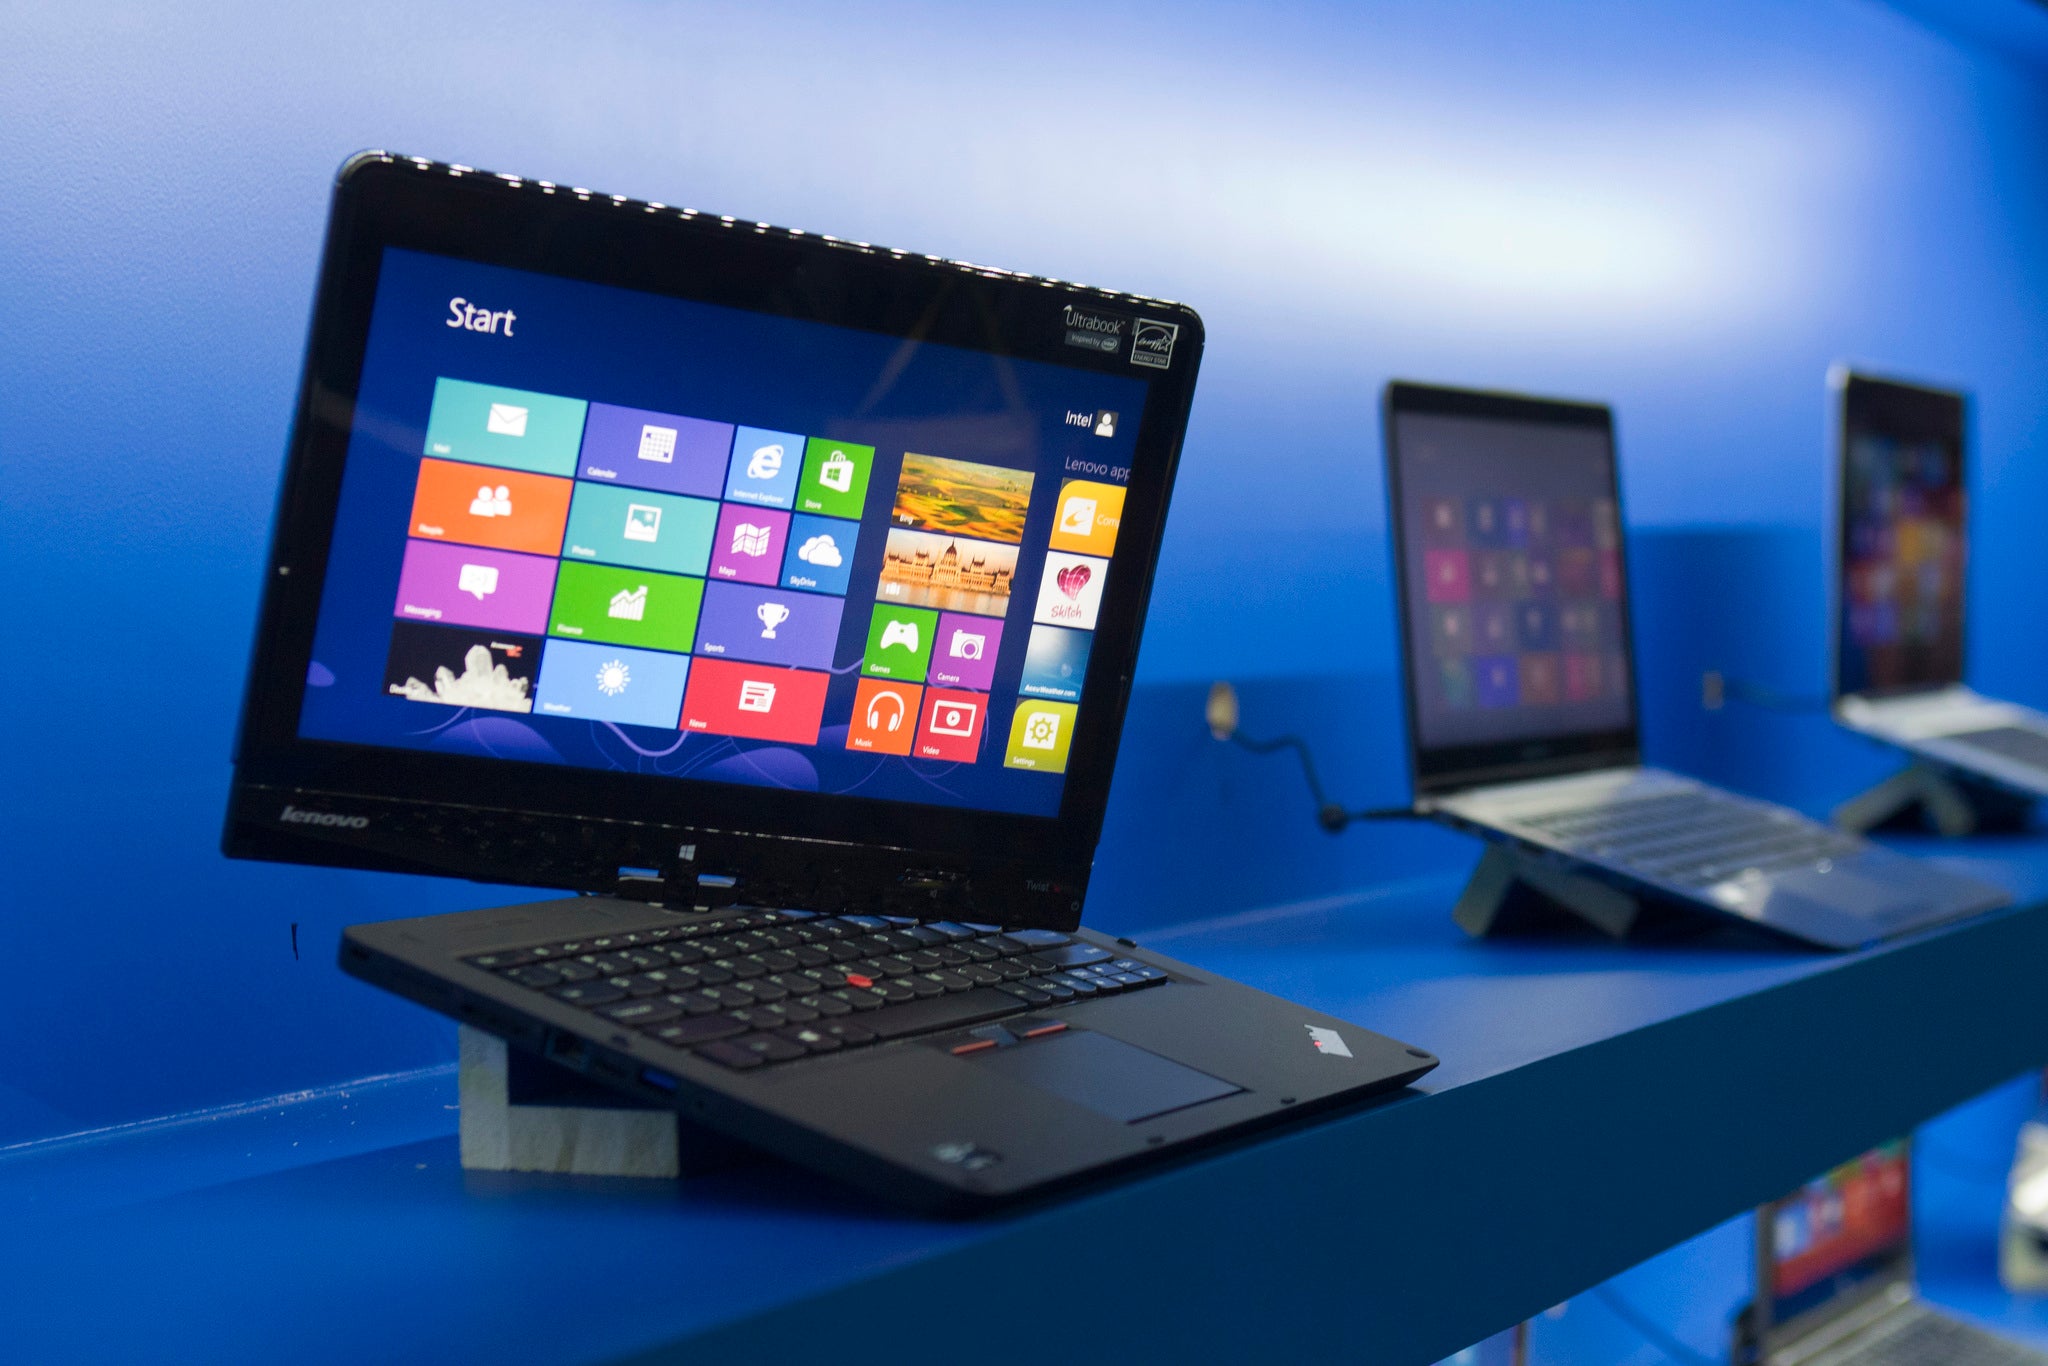 A convertible Lenovo Ultrabook is displayed at an Intel news conference during the Consumer Electronics Show (CES) in Las Vegas January 7, 2013. Intel announced improvements to its processors including one with "all day" battery life. Intel also announced